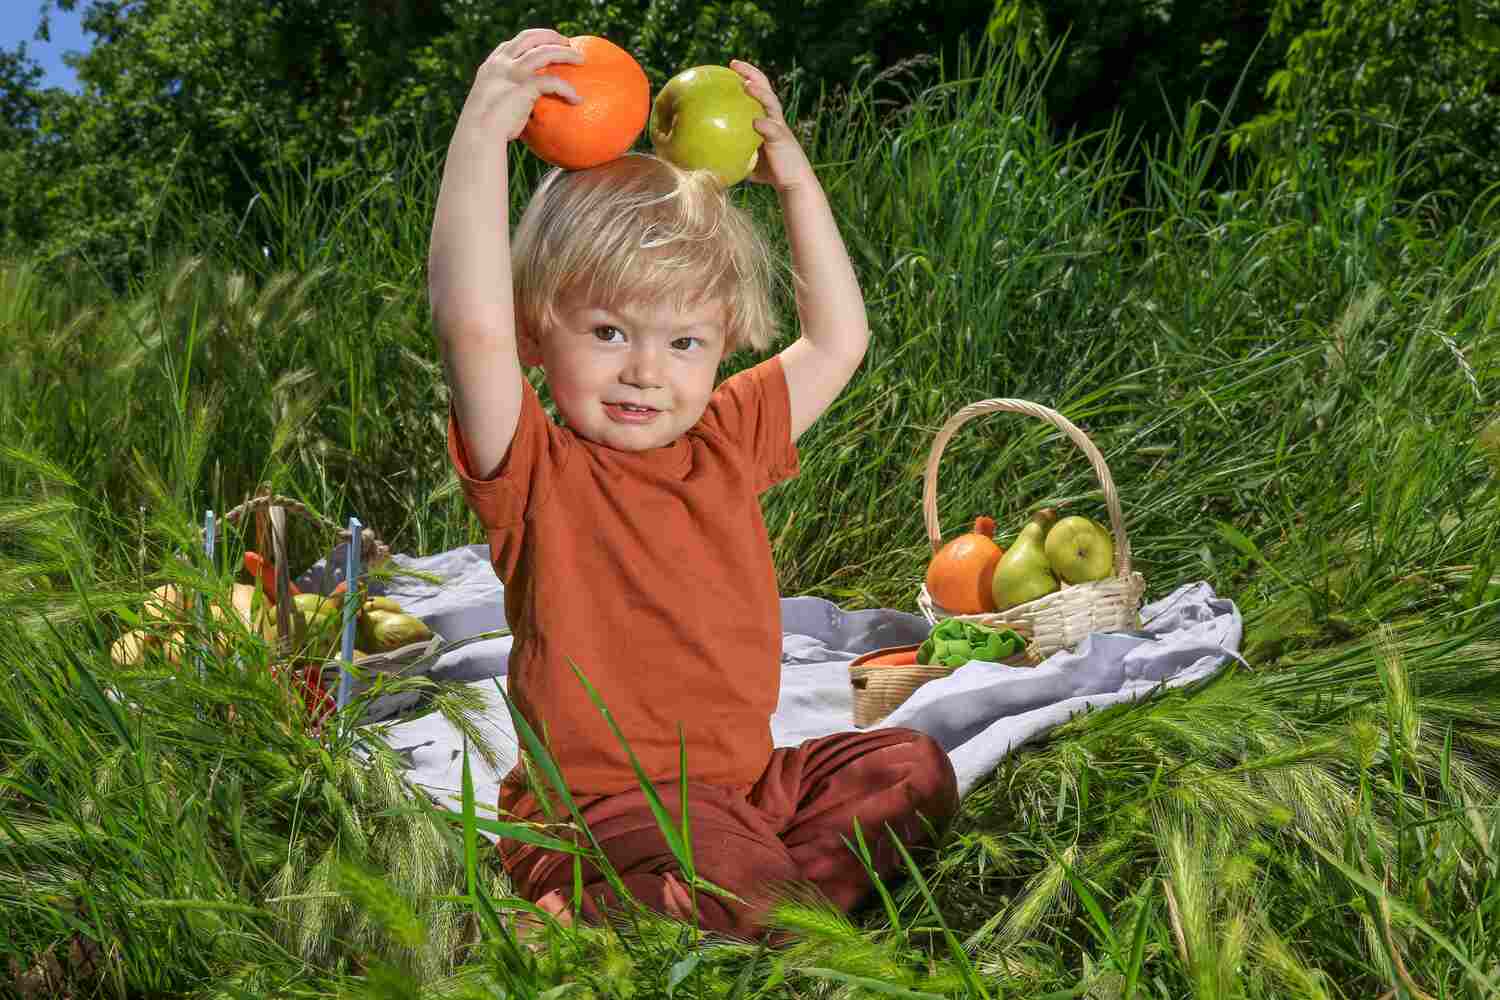 Fruits and vegetables contain nutrients which help build immunity in toddlers